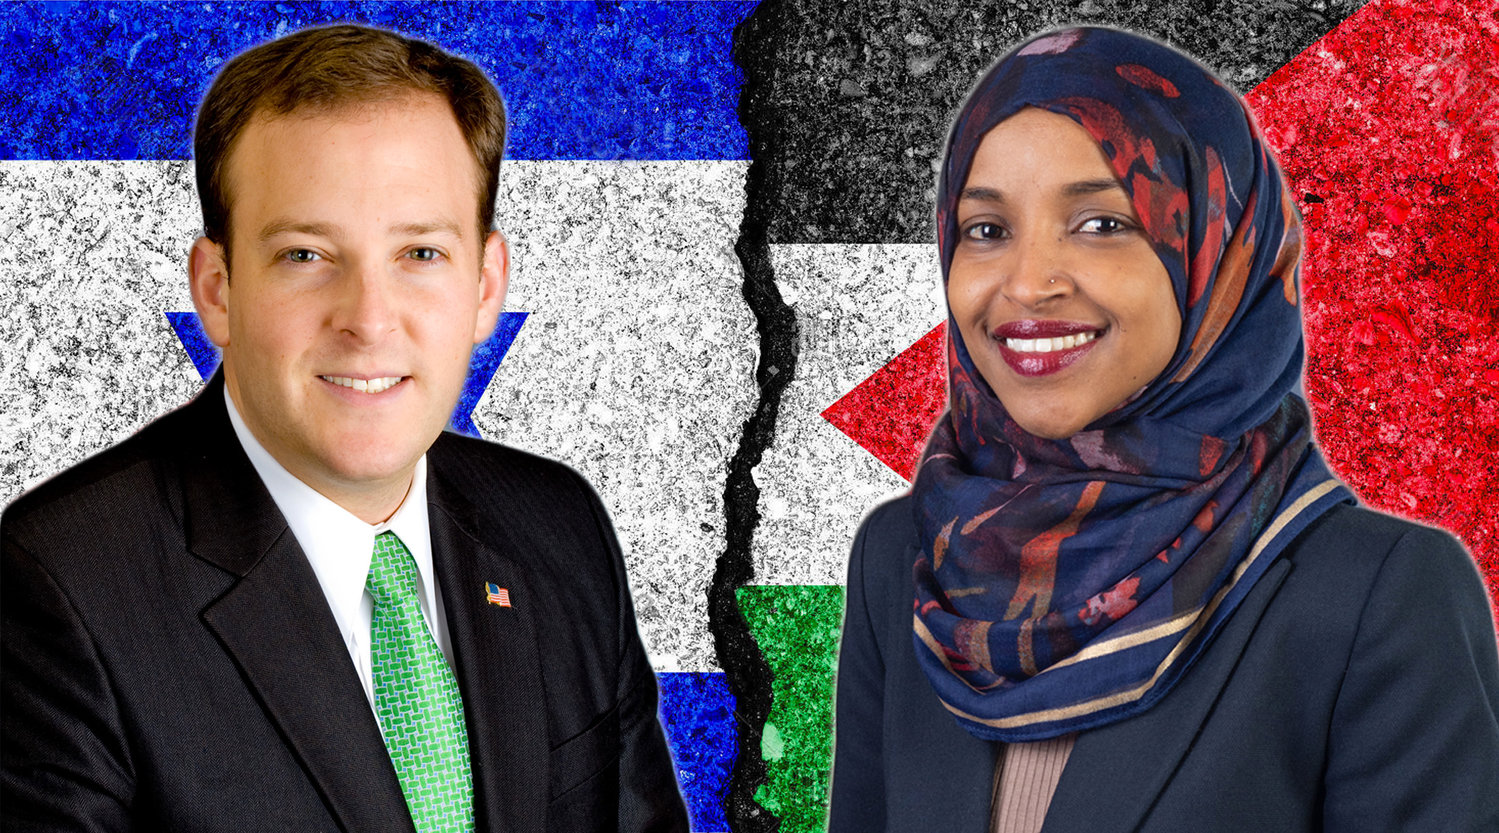 The cover of last week’s Jewish Star featured a report on a Twitter feud between LI Rep. Lee Zeldin and Rep. Ilhan Omar over Omar’s support of BDS.